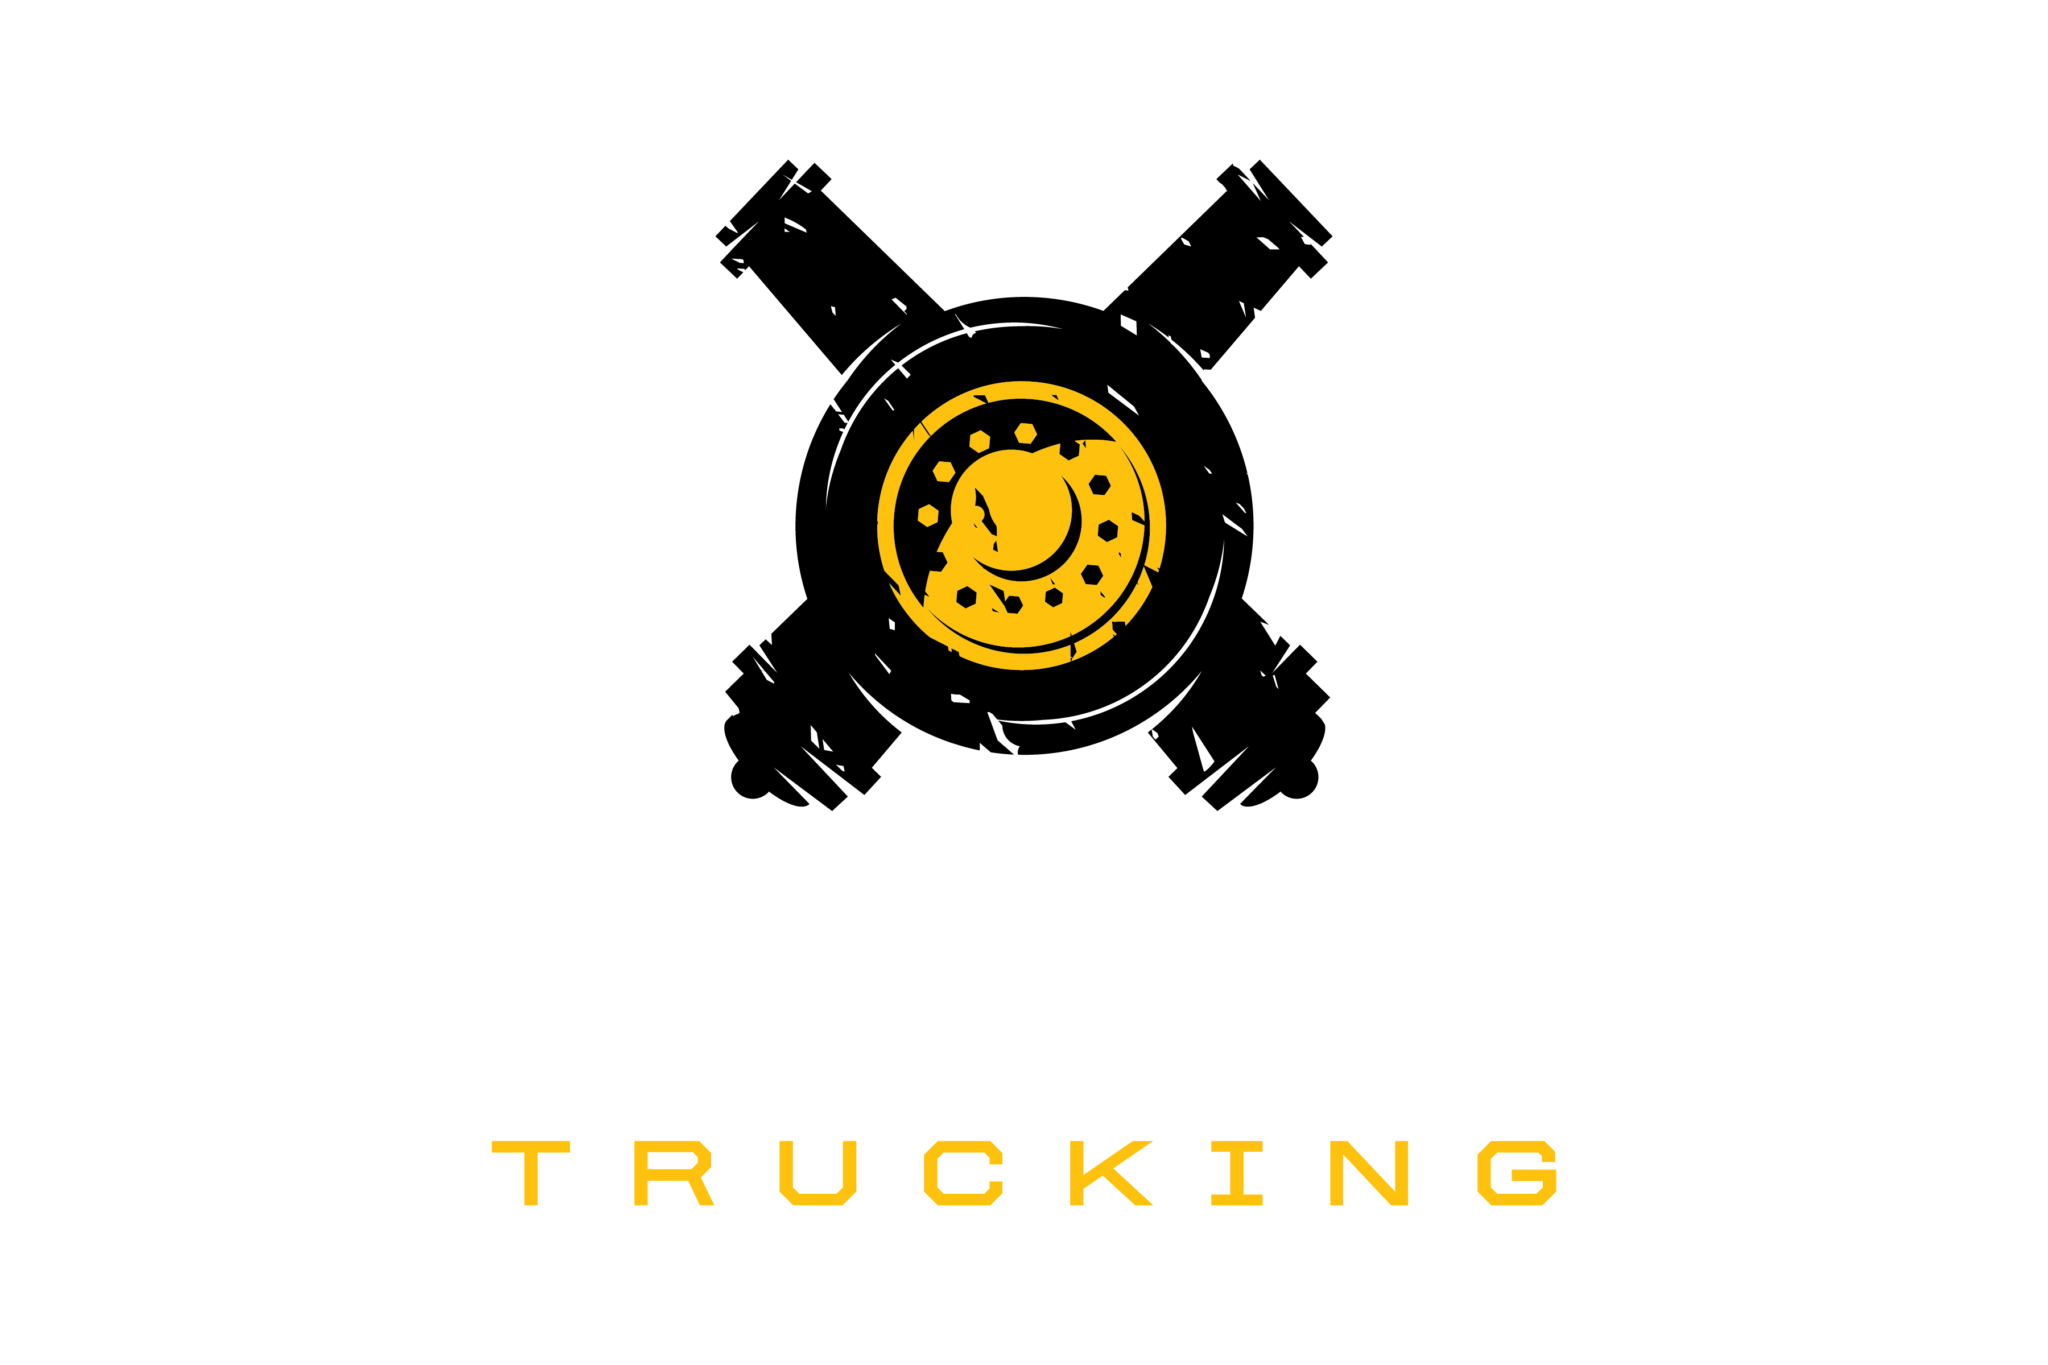 Cannonball Trucking